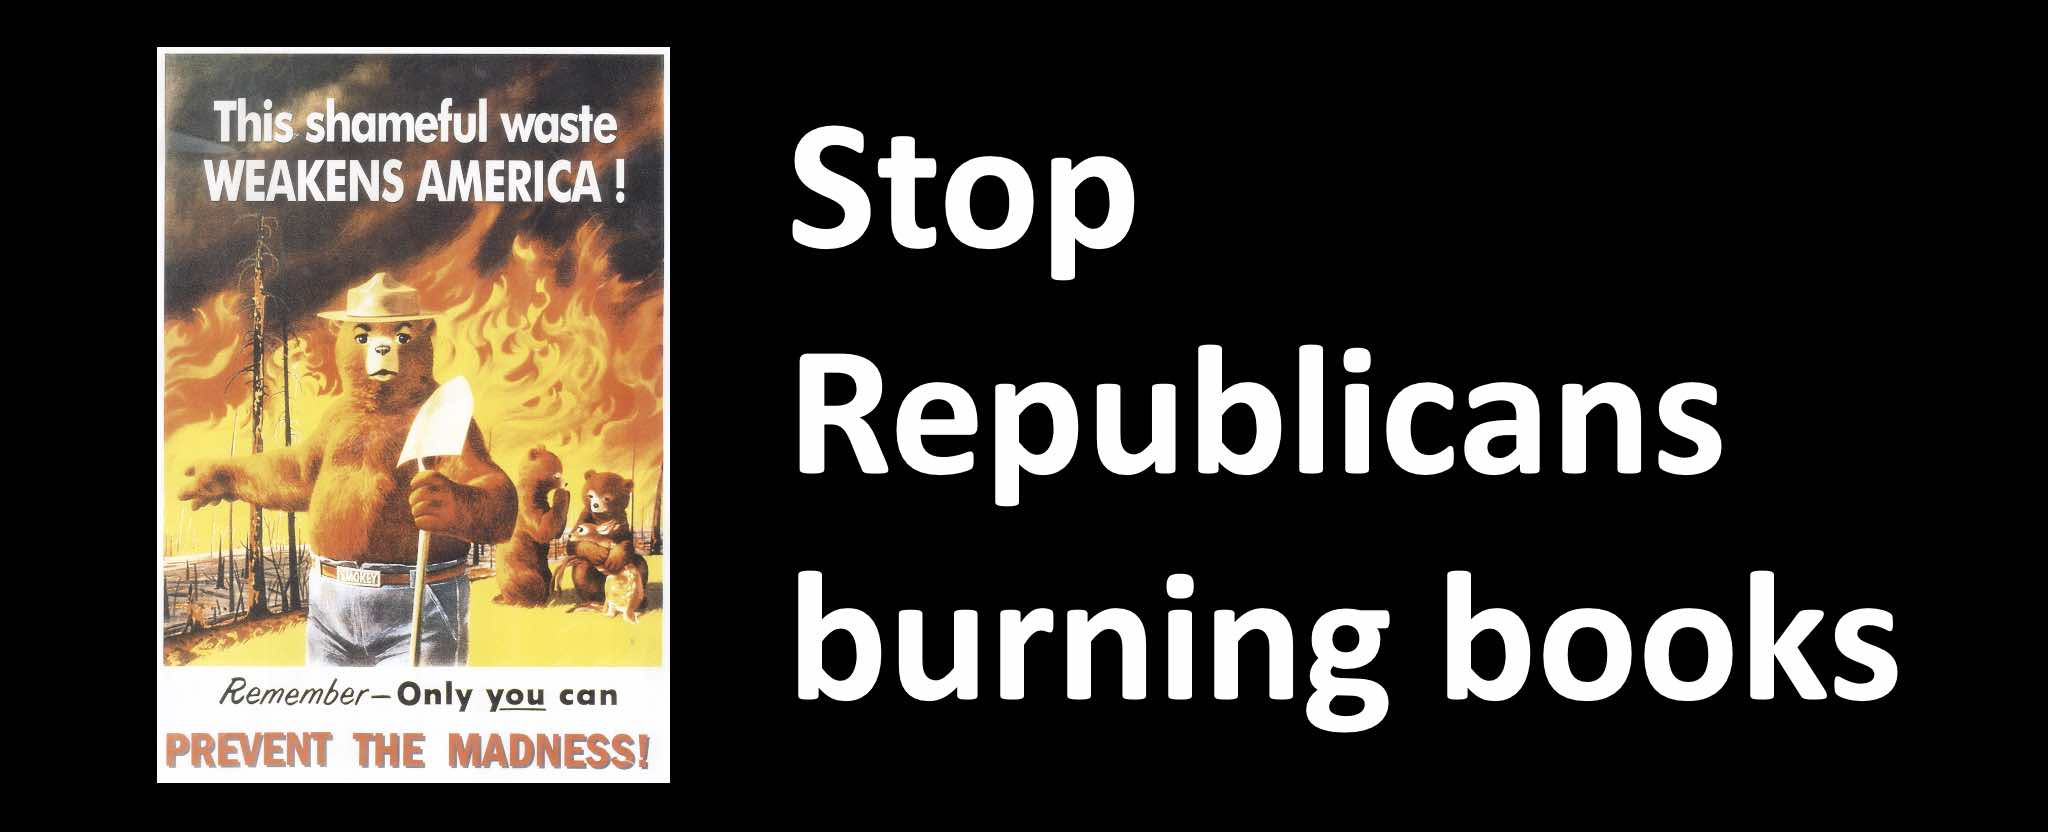 Stop Republican book bans and burnings that are killing the freedom of speech